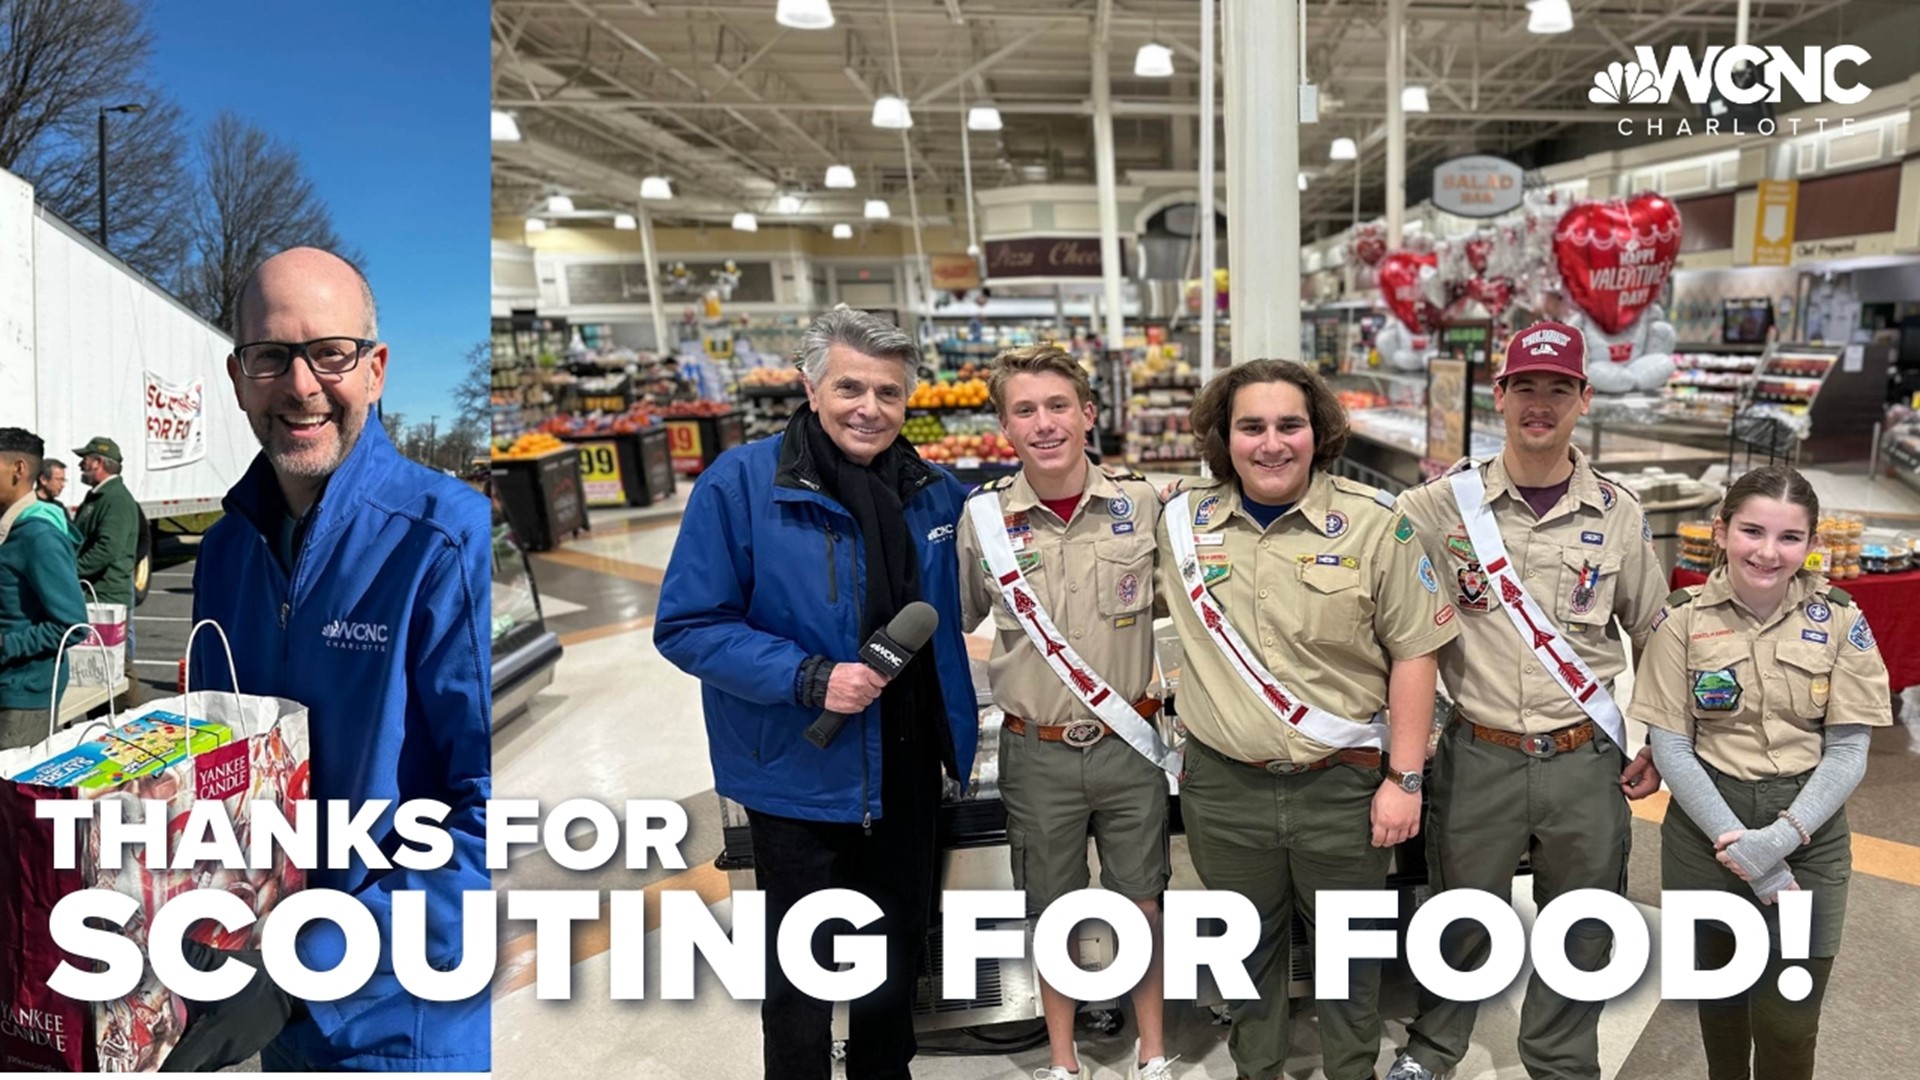 Jane Monreal shares how WCNC Charlotte and local Boy Scouts teamed up to help neighbors in need.